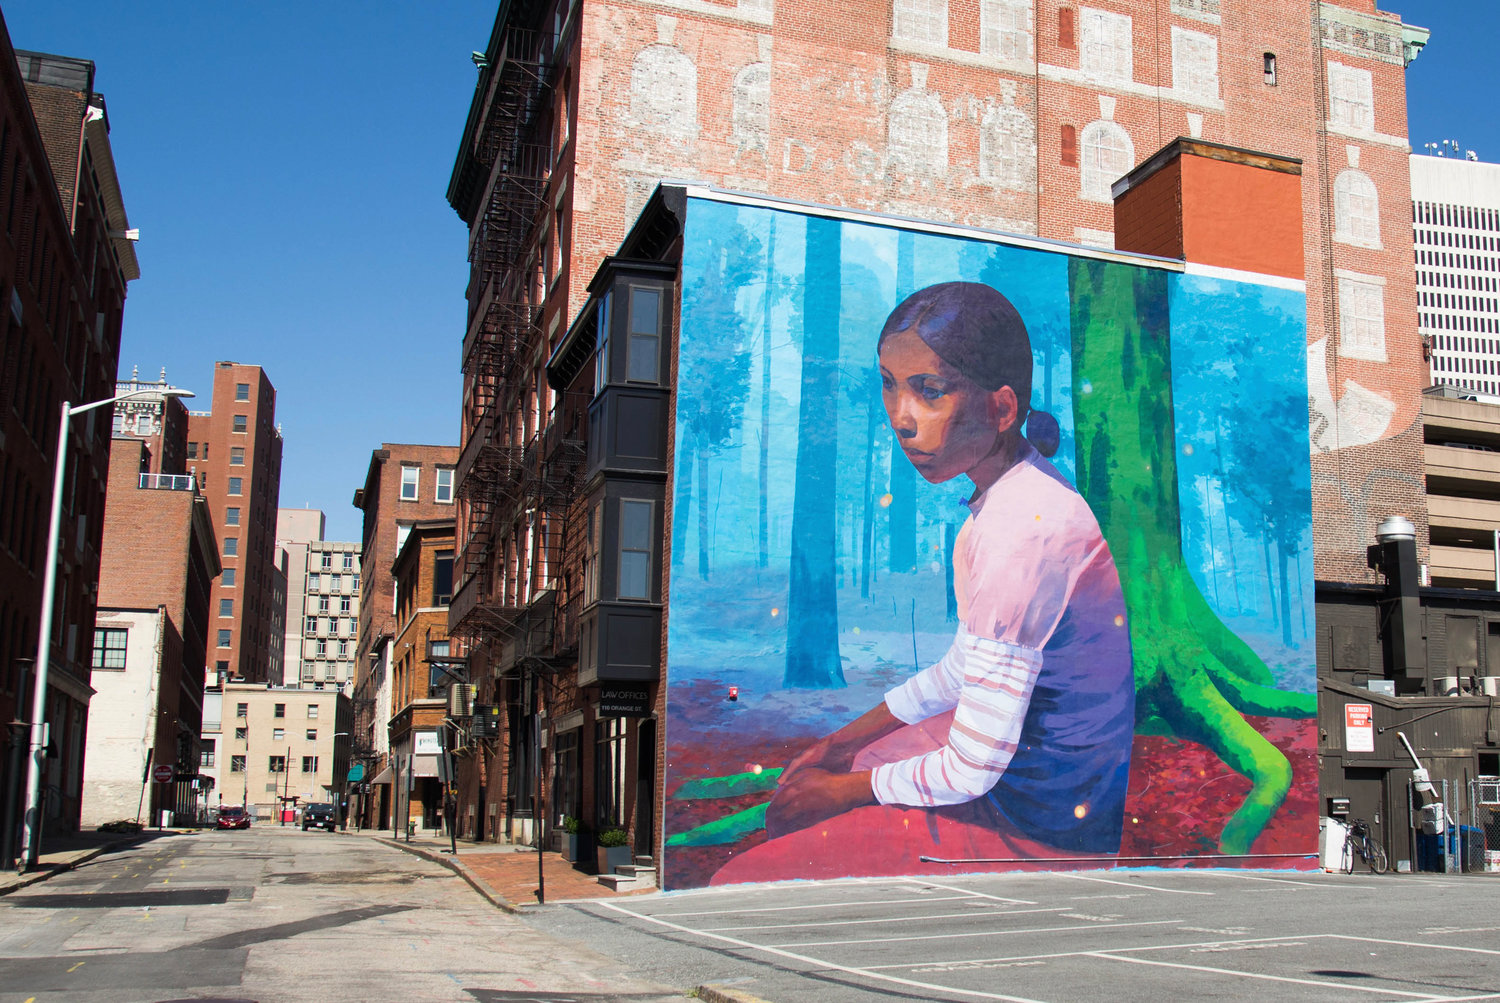 Tour The Avenue Concept murals found in neighborhoods across the city